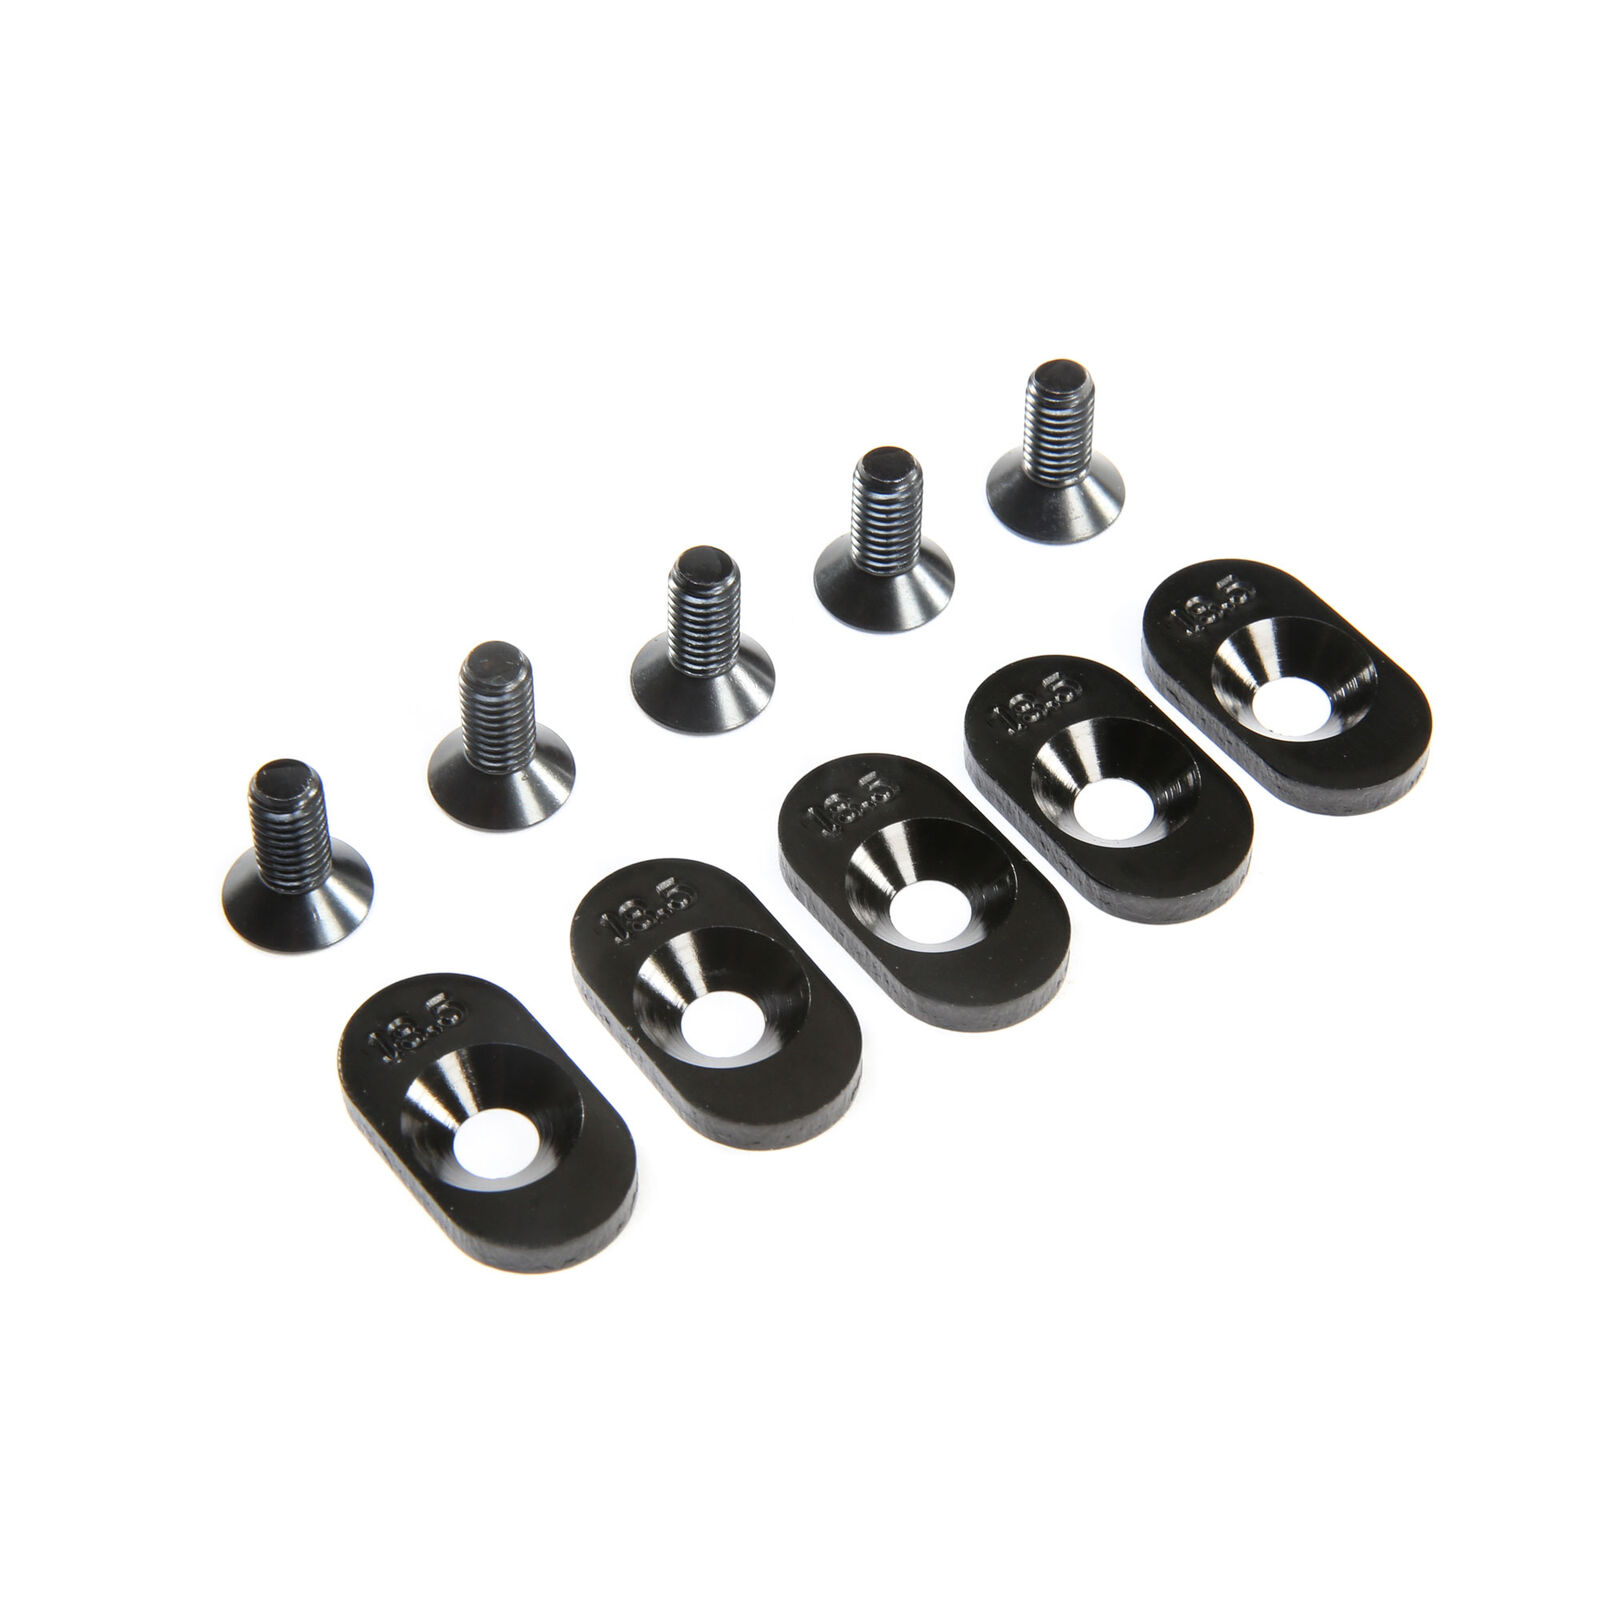 Engine Mount Insert and Screws 18.5T, Black (5): 5ive-T 2.0 (fits 62T spur)